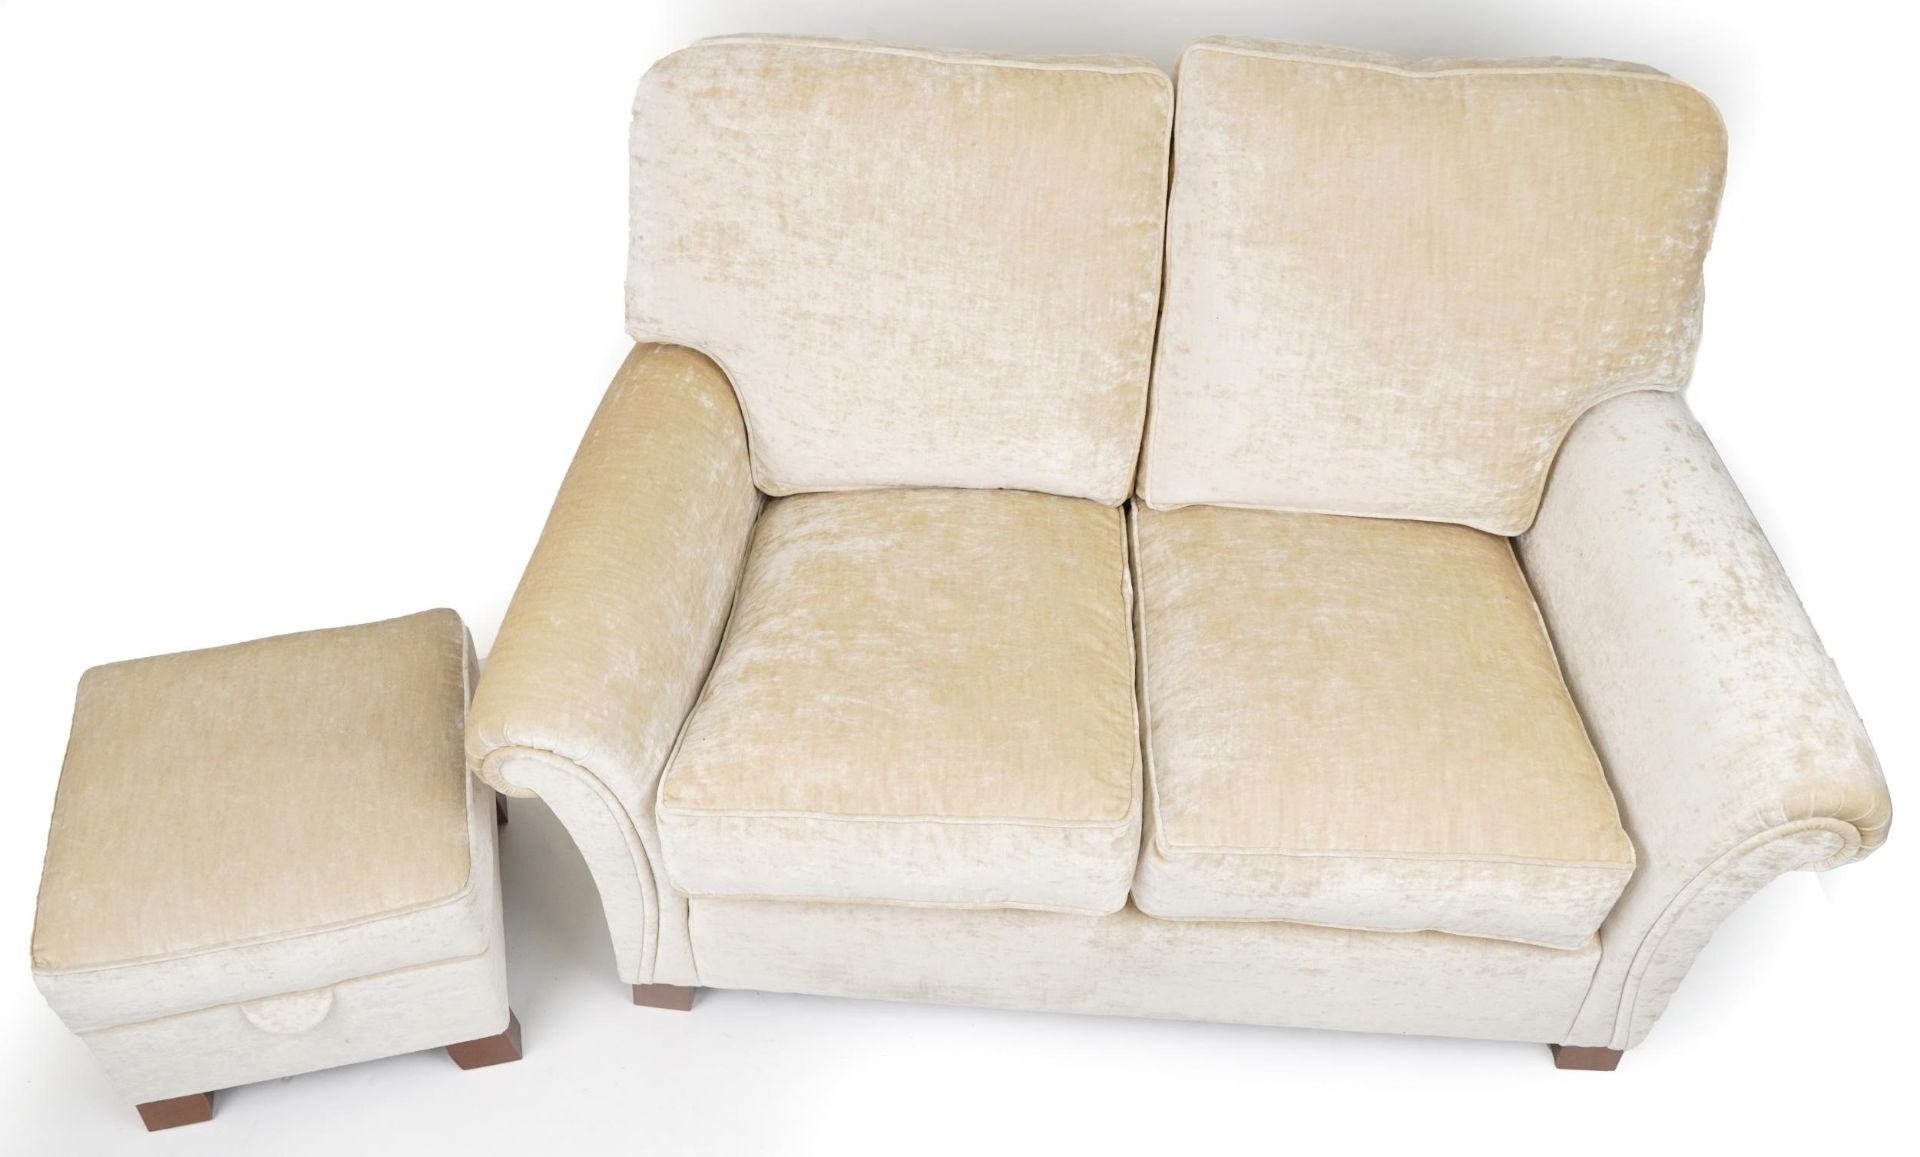 Contemporary beige upholstered two seater settee with matching footstool, 100cm H x 145cm W x - Image 3 of 4